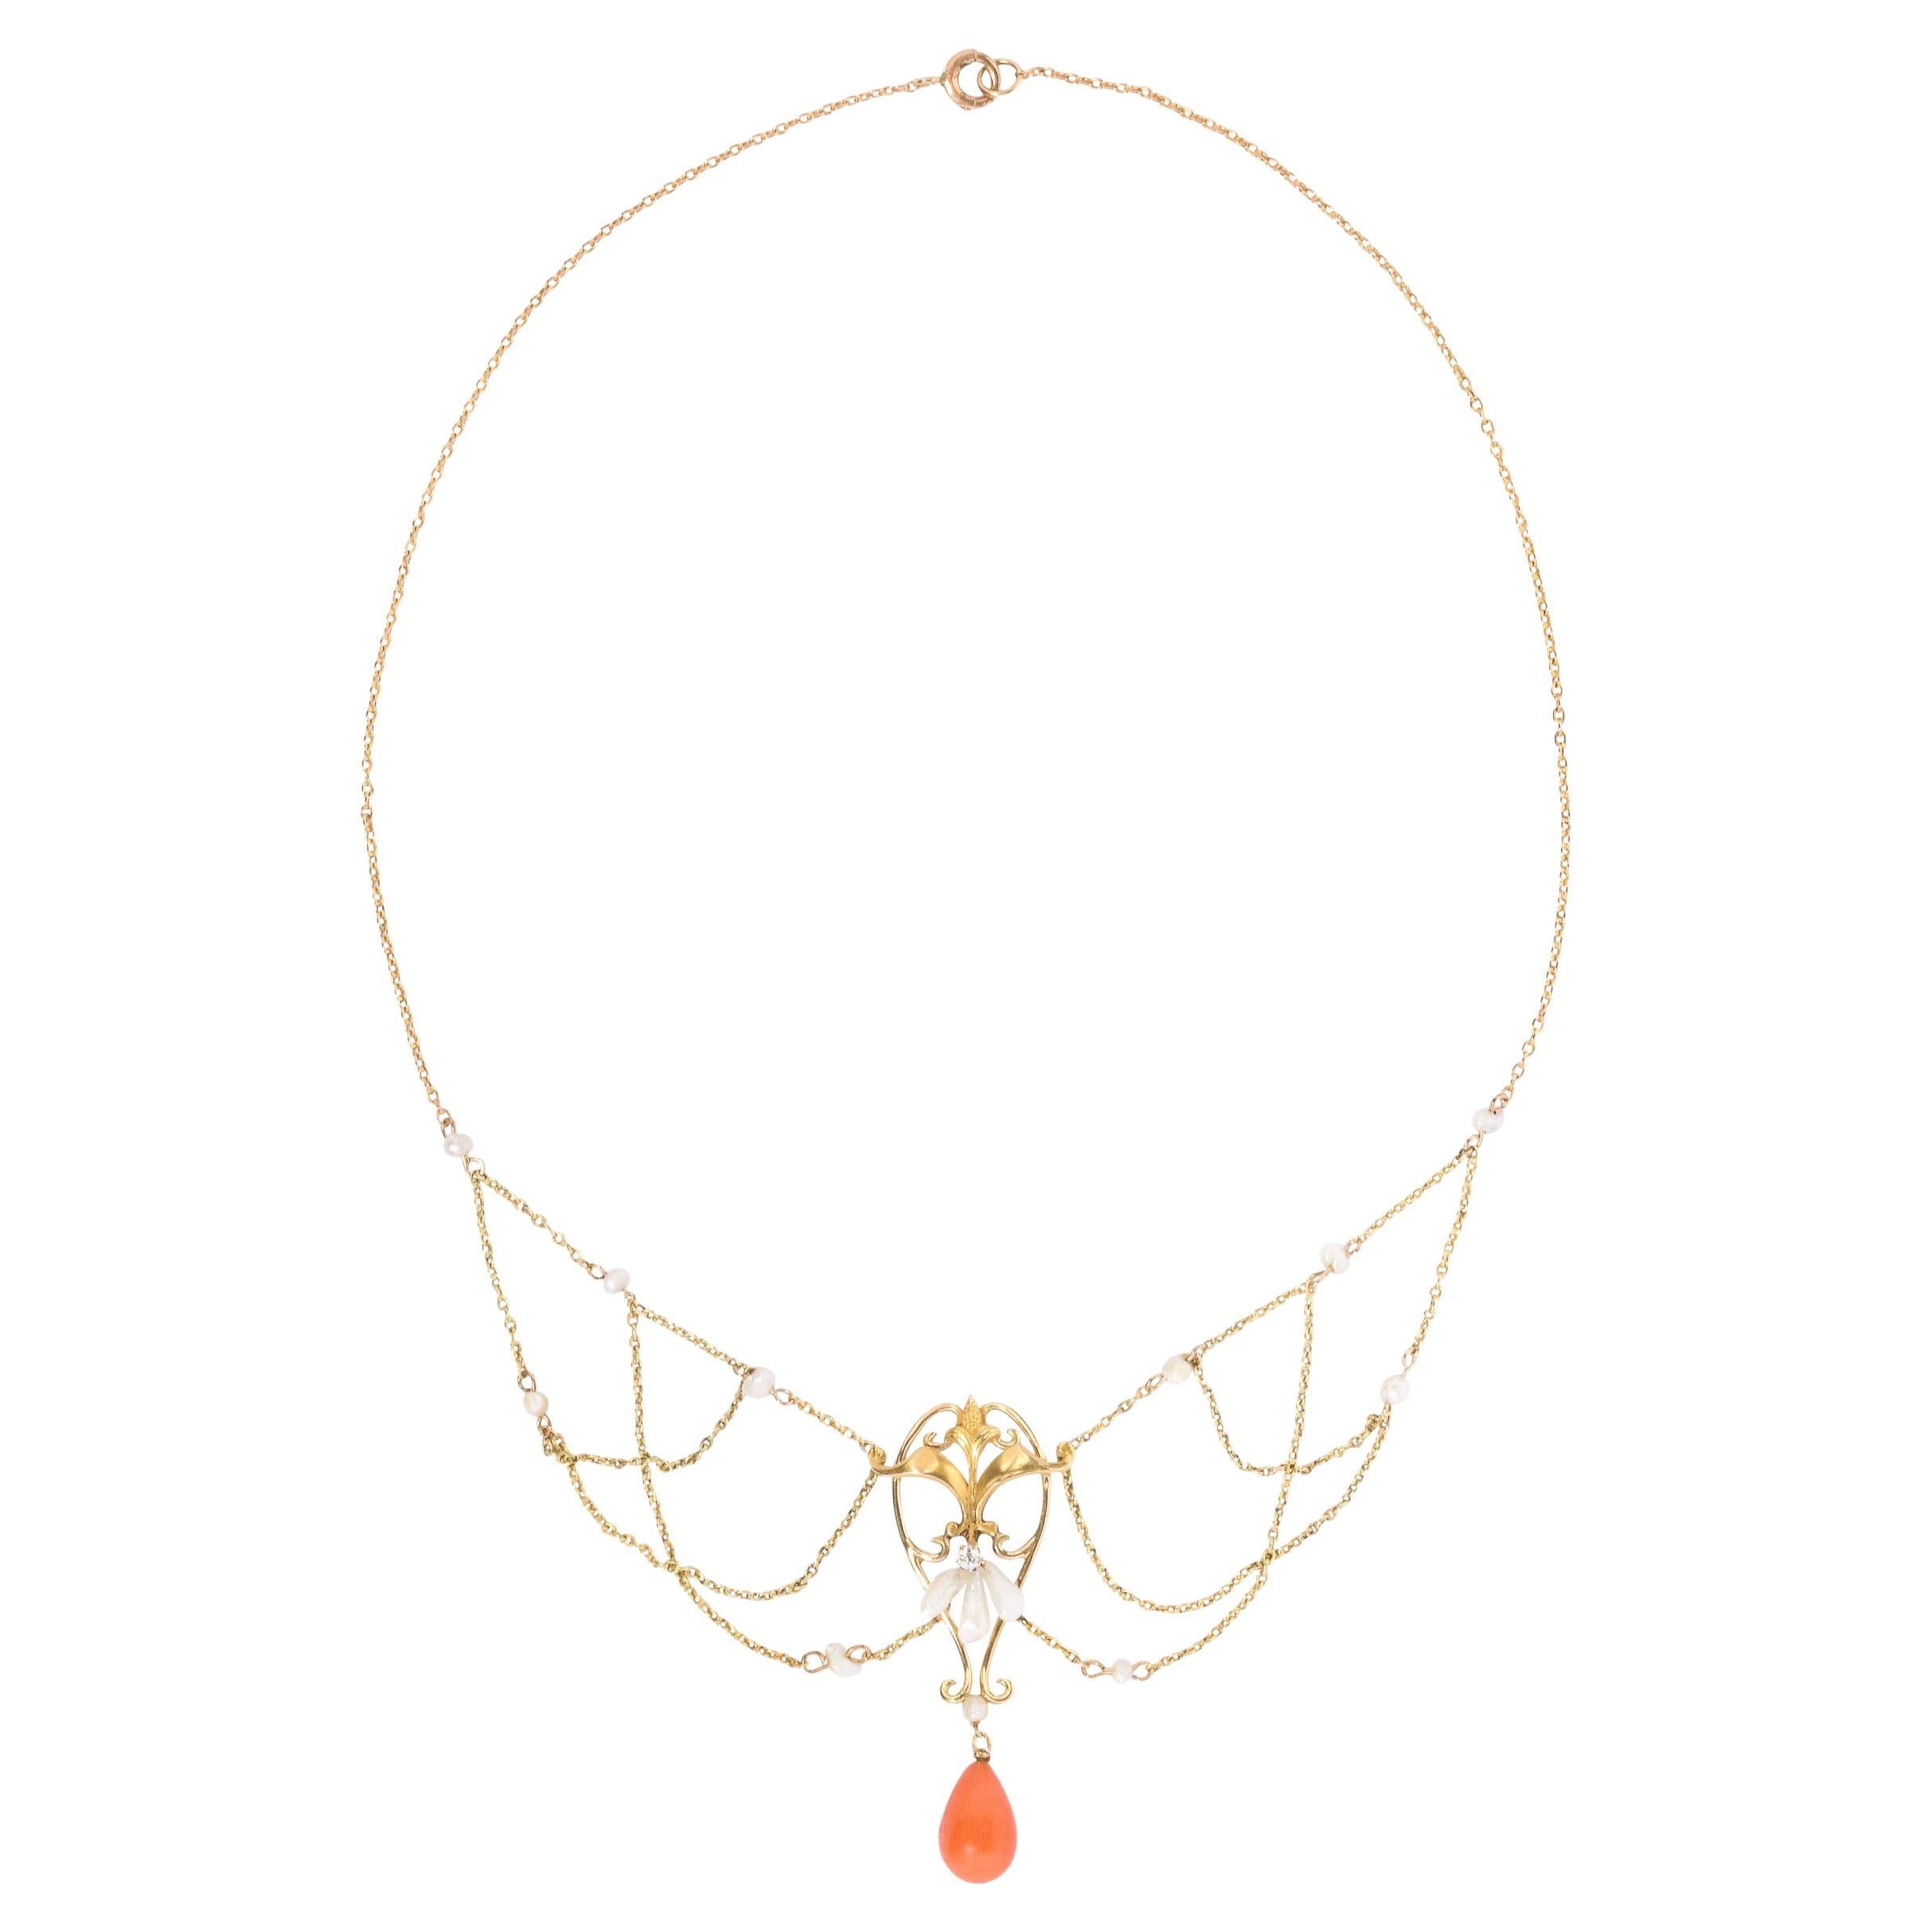 Art Nouveau 14k Gold, Pearl, Coral and Diamond Swag Necklace